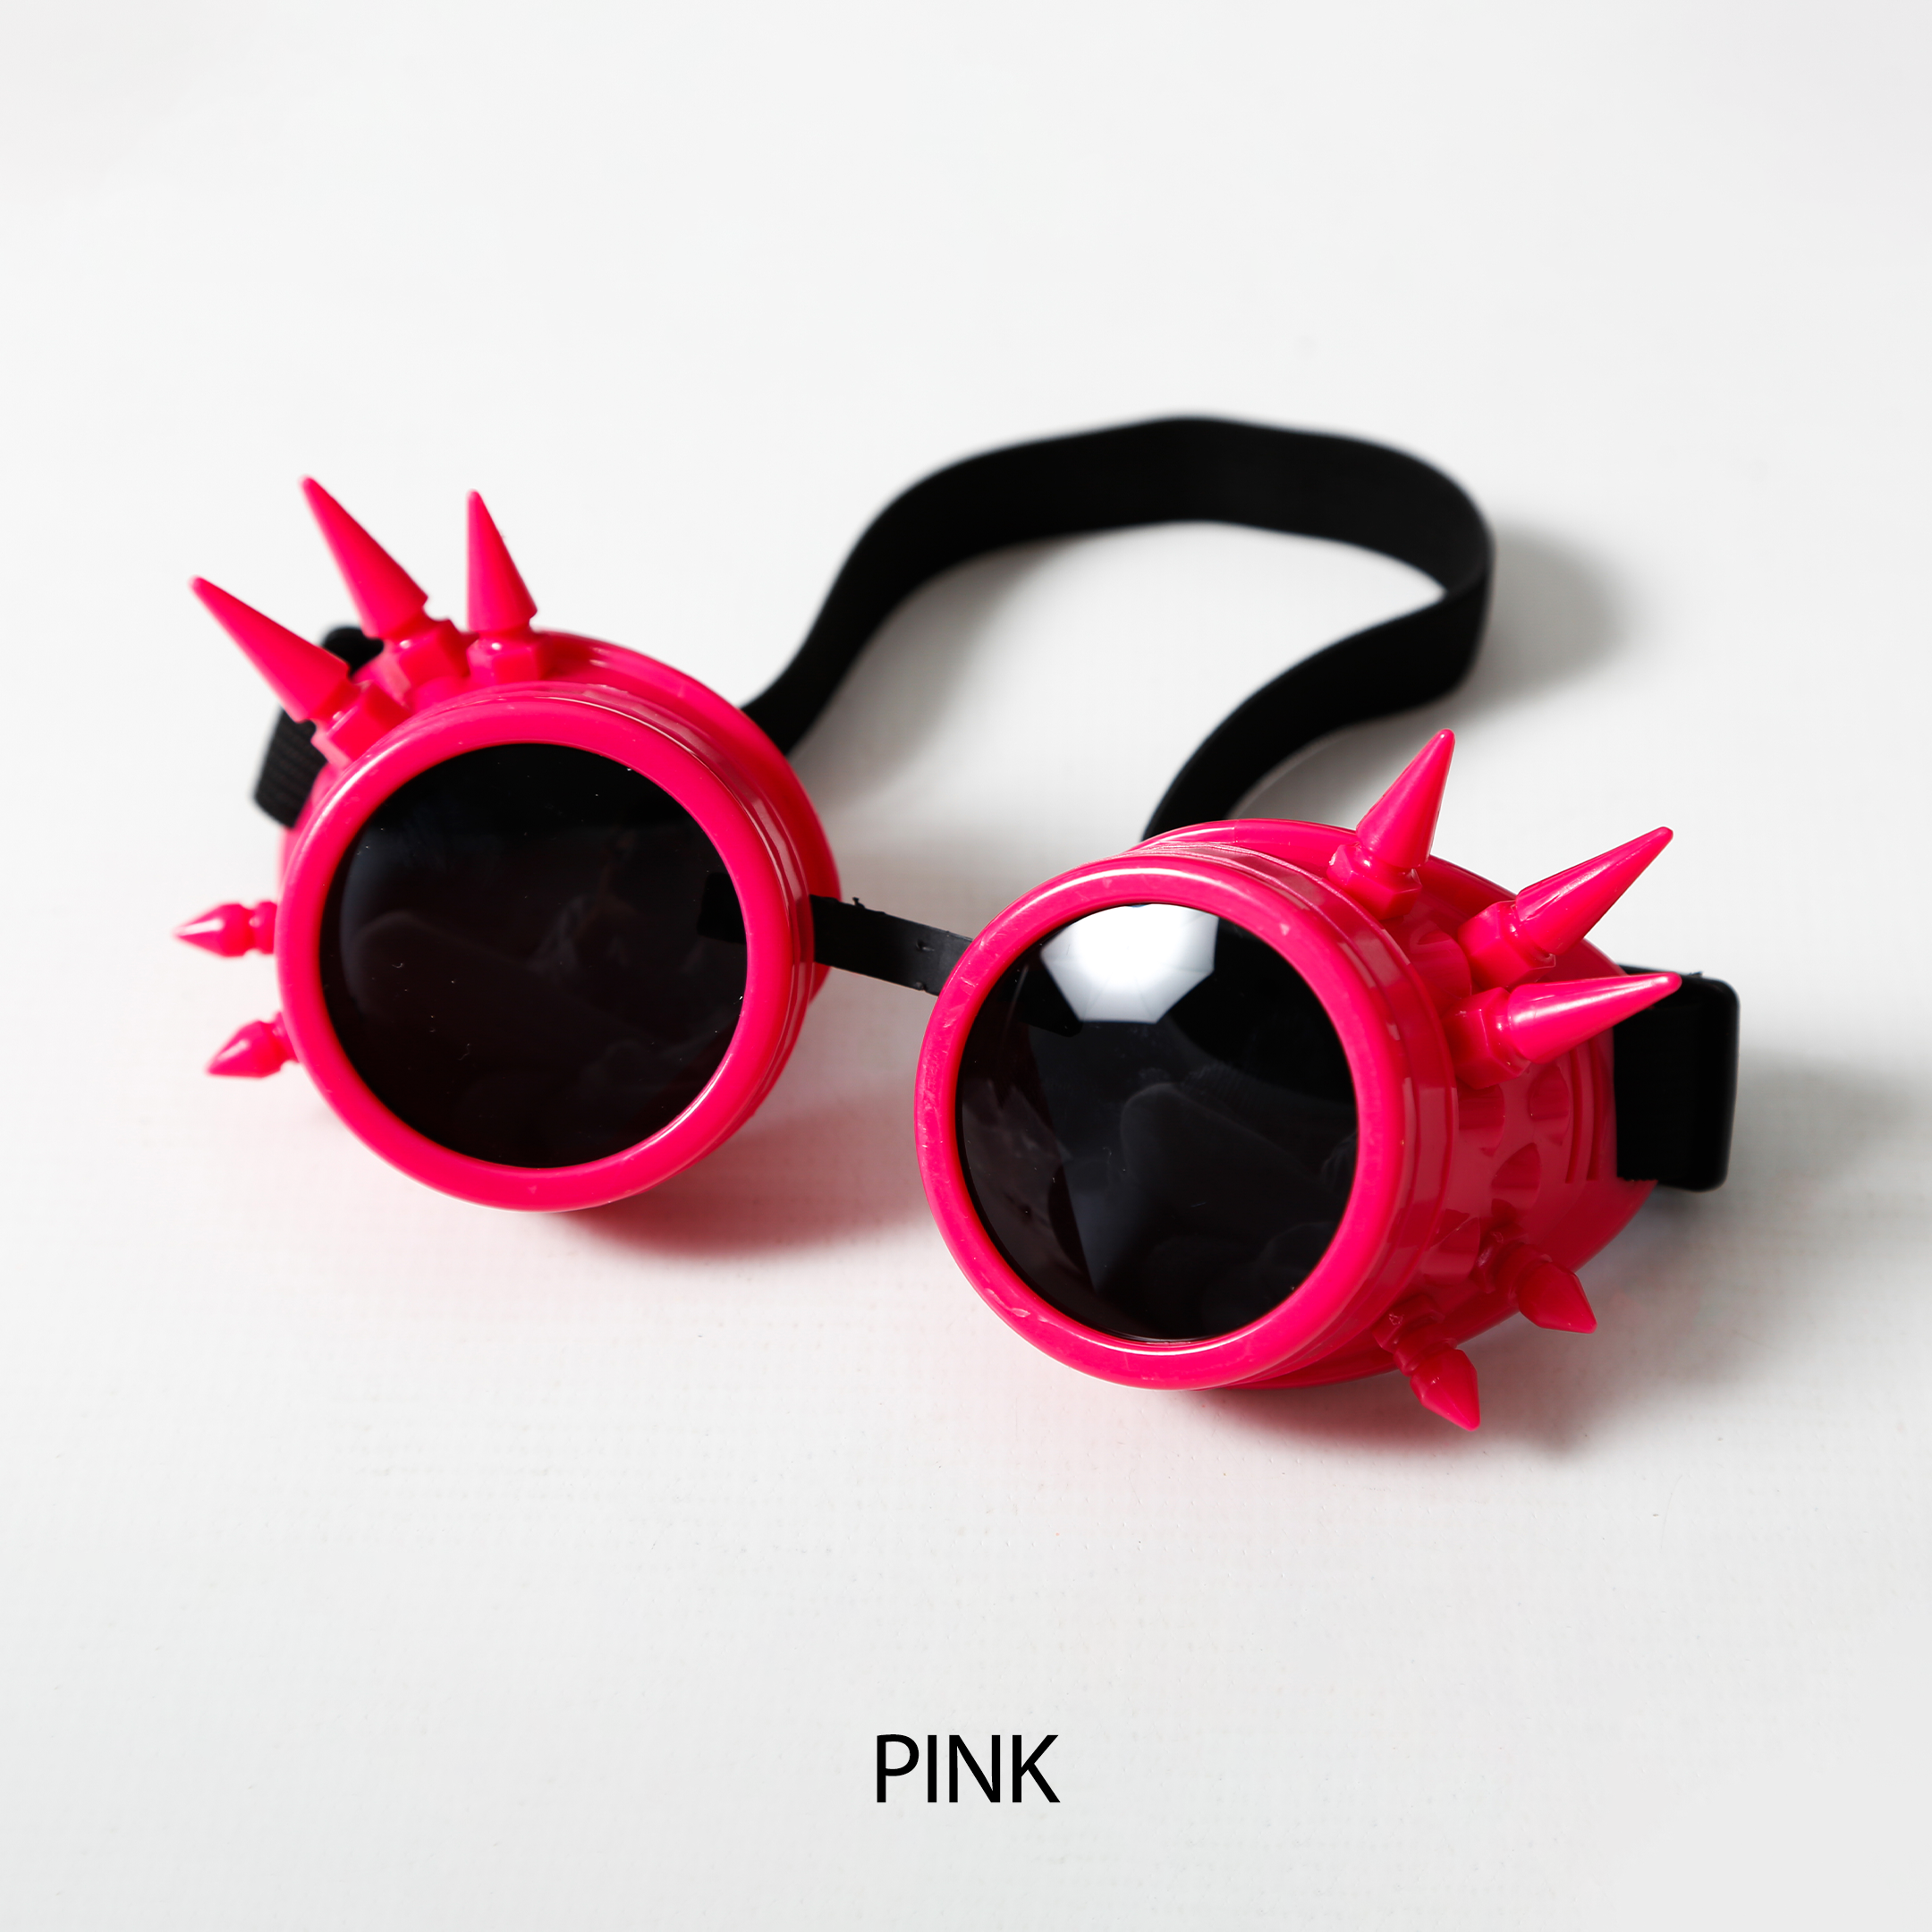 pink steampunk black lens glasses Electro Glow | South Africa's Best LED Festival Gear & Rave Clothes - festivals outfits, clothes festival, festival clothing south africa, festival ideas outfits, festival outfits rave, festival wear, steam punk goggle, rave glasses, outfit for a rave, kaleidoscope glasses, diffraction glasses, clothes for a rave, rave sunglasses, spectral glasses, rave goggles, clothes for a rave, rave clothing south africa, festival wear south africa, accessories festival